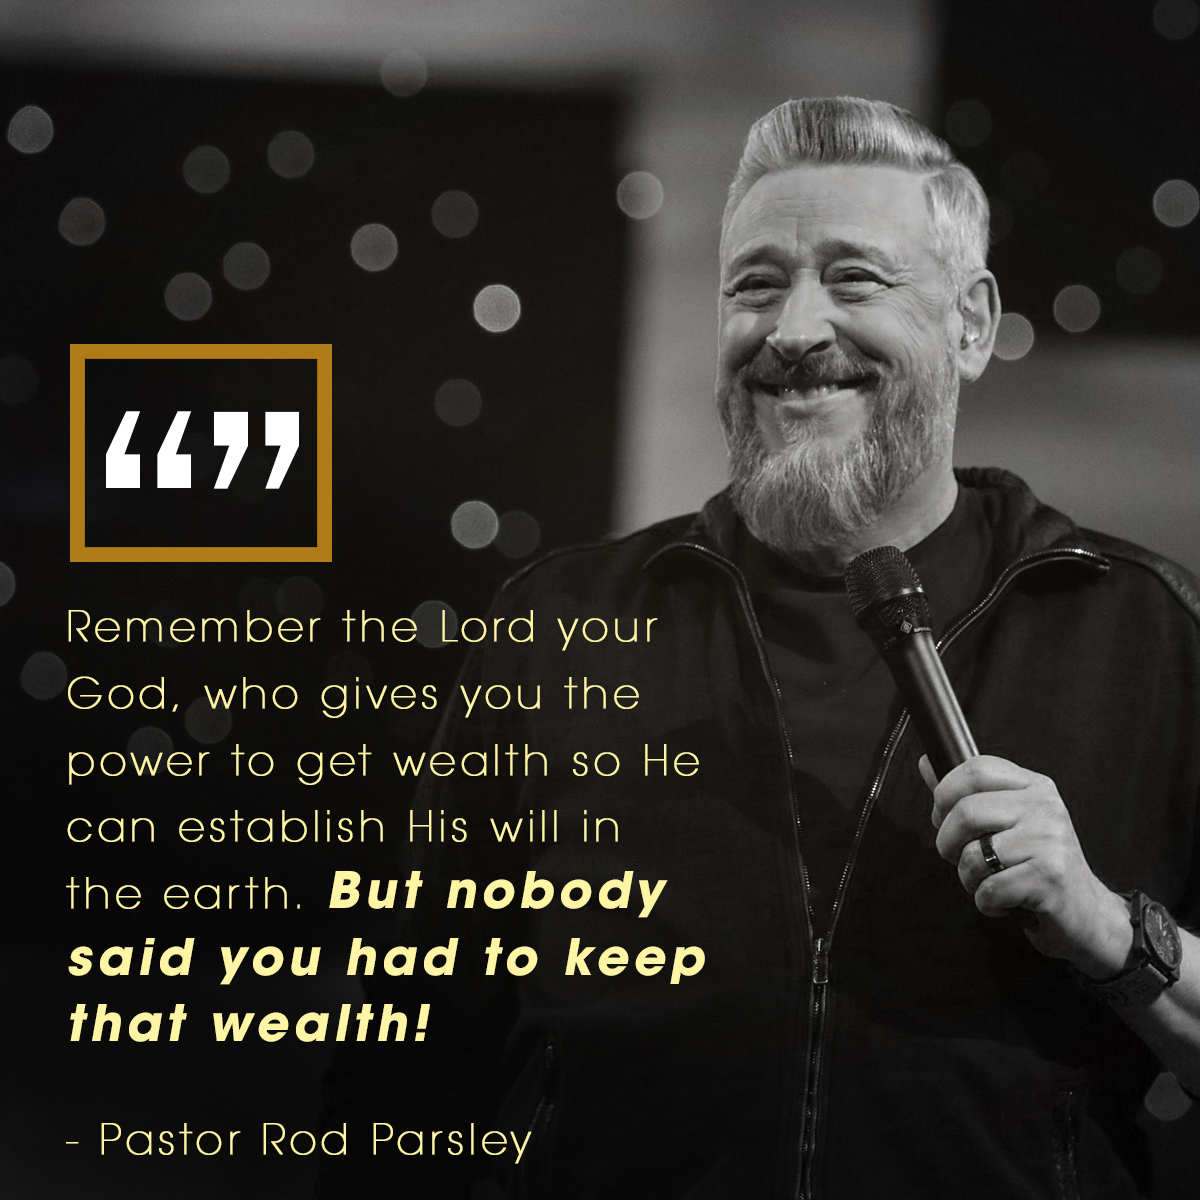 “Remember the Lord your God, who gives you the power to get wealth so He can establish His will in the earth. But nobody said you had to keep that wealth!” – Pastor Rod Parsley